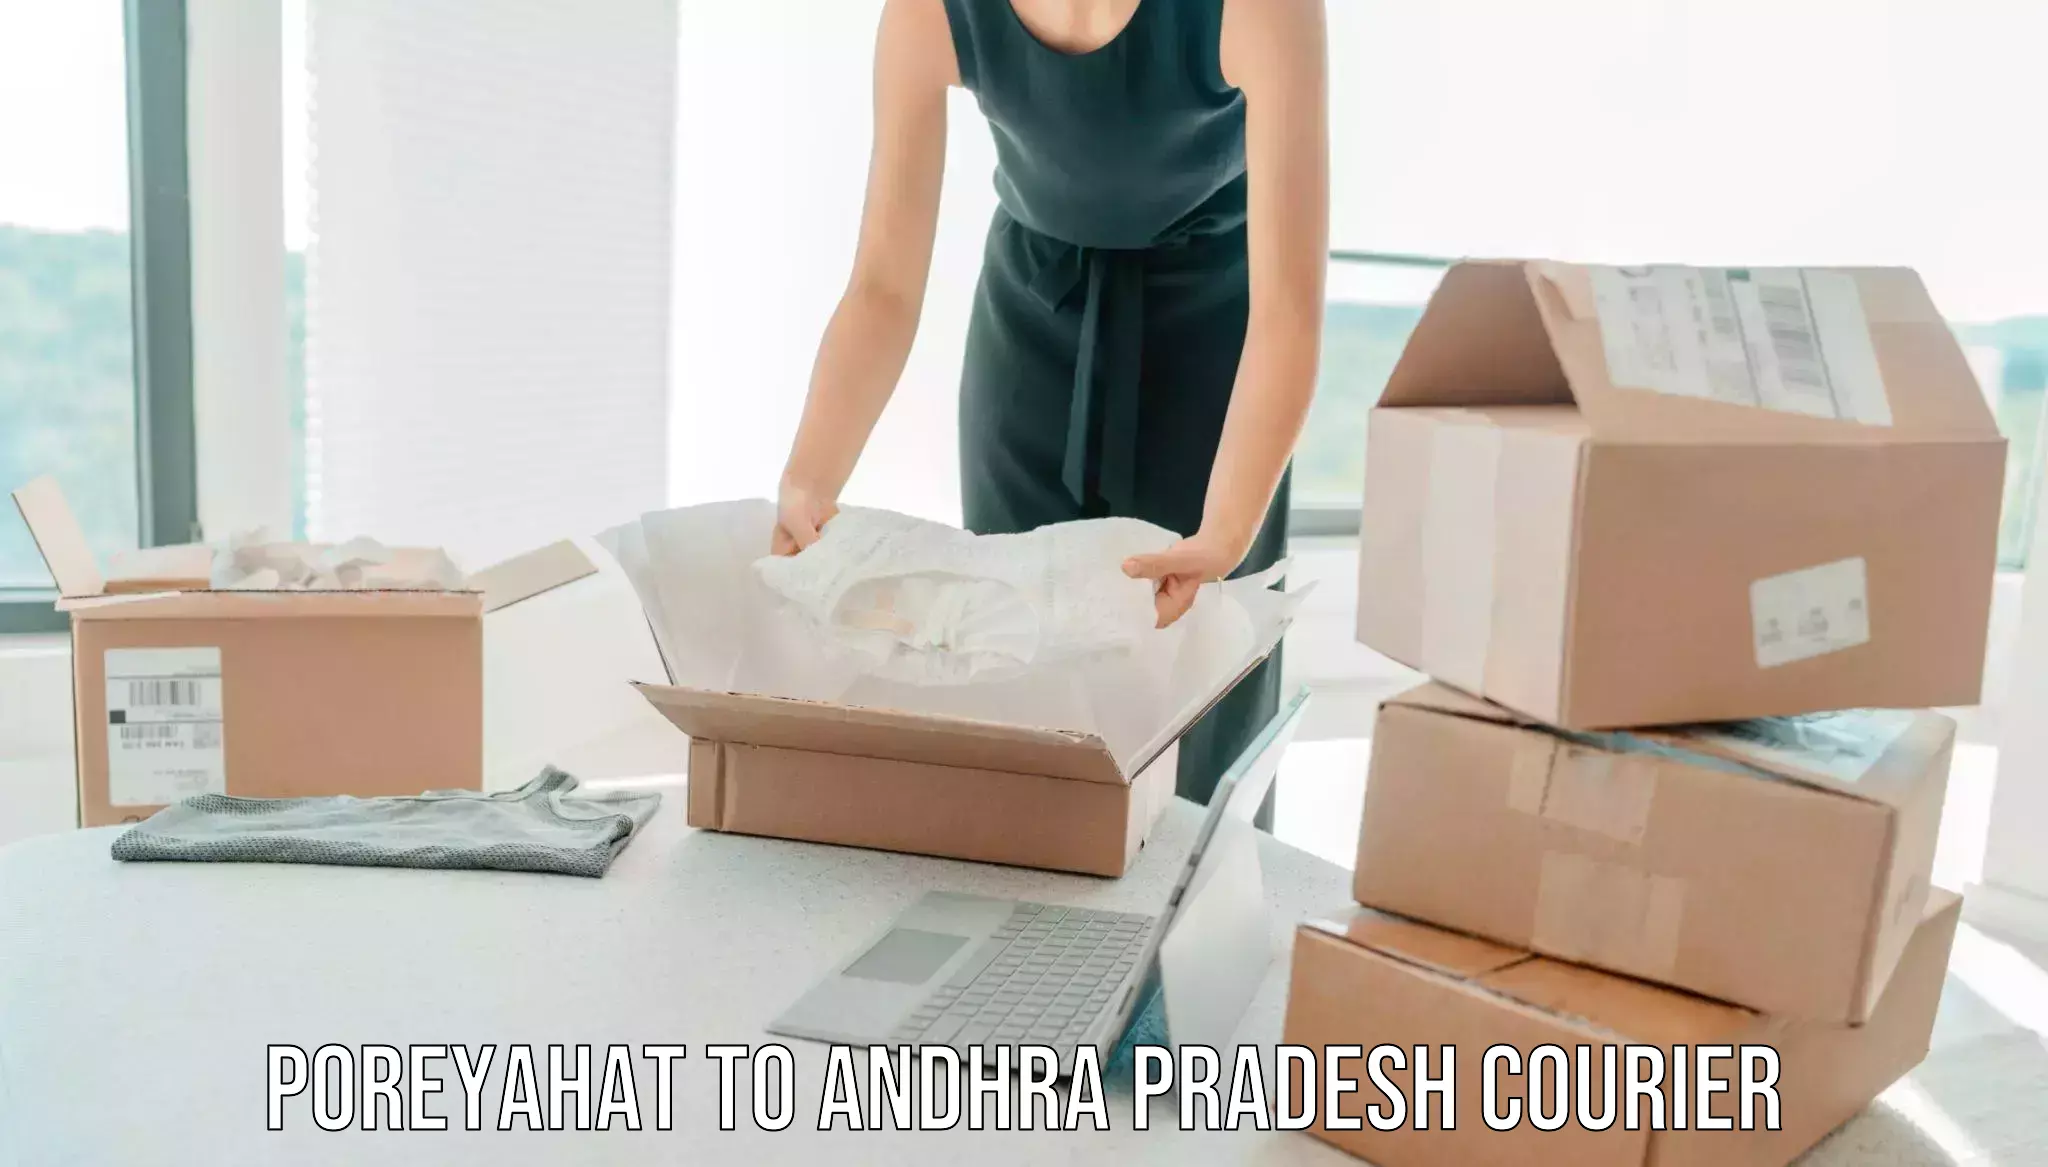 Cost-effective moving solutions Poreyahat to Andhra Pradesh